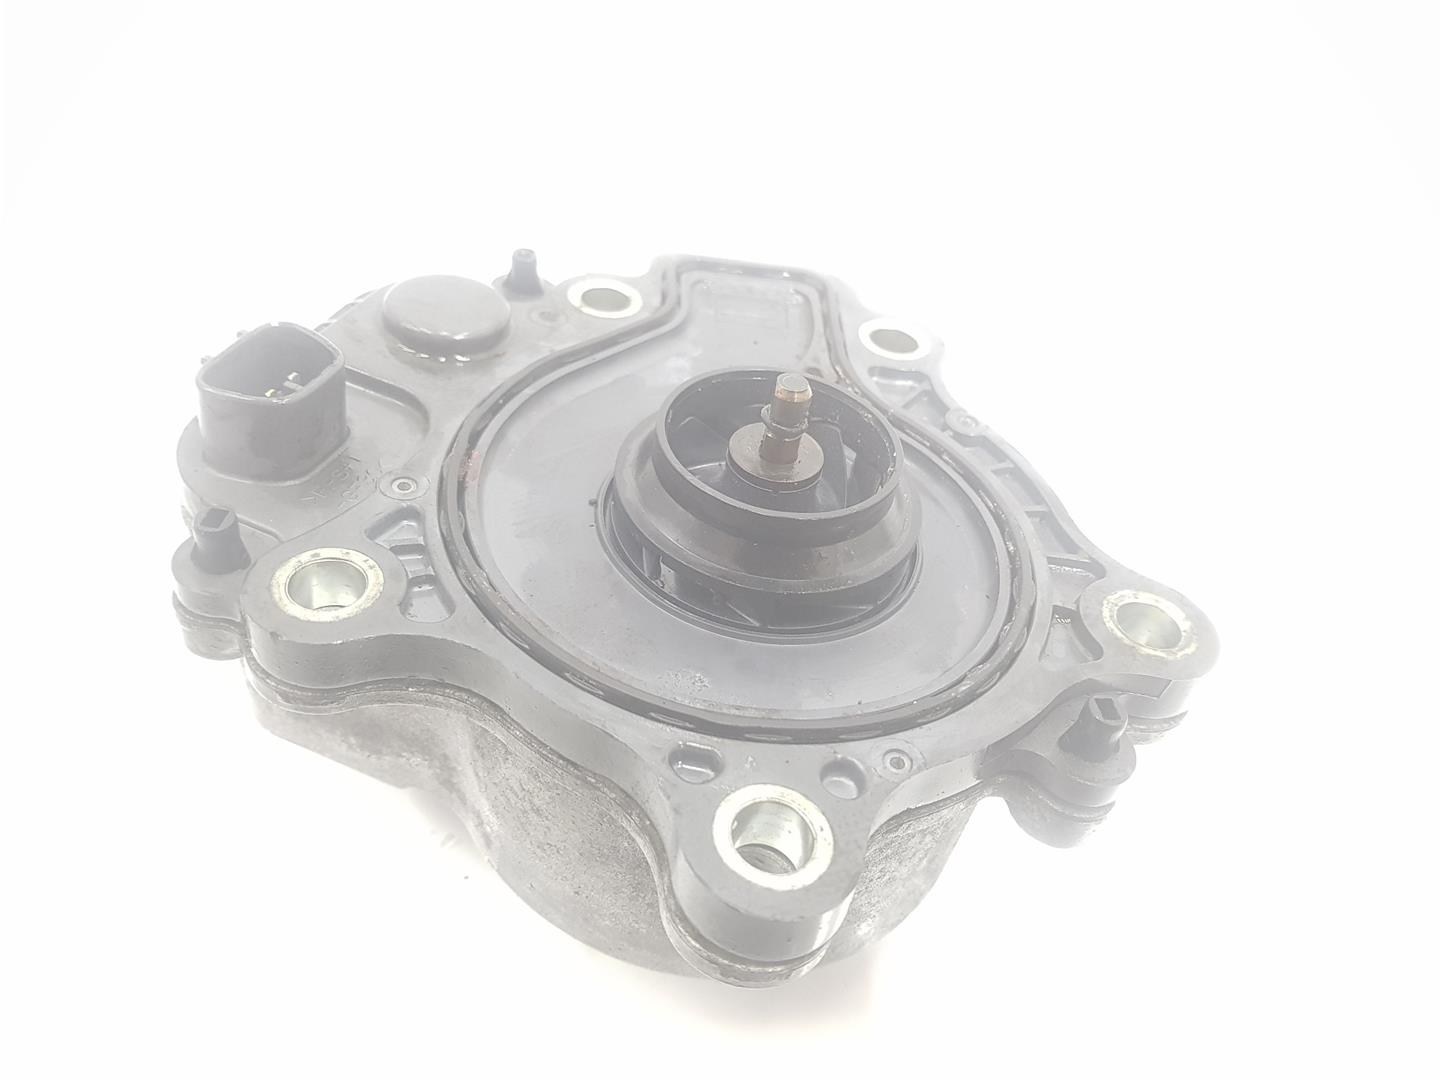 TOYOTA Prius 3 generation (XW30) (2009-2015) Water Pump 161A029015, 161A029015, 1151CB 24252169